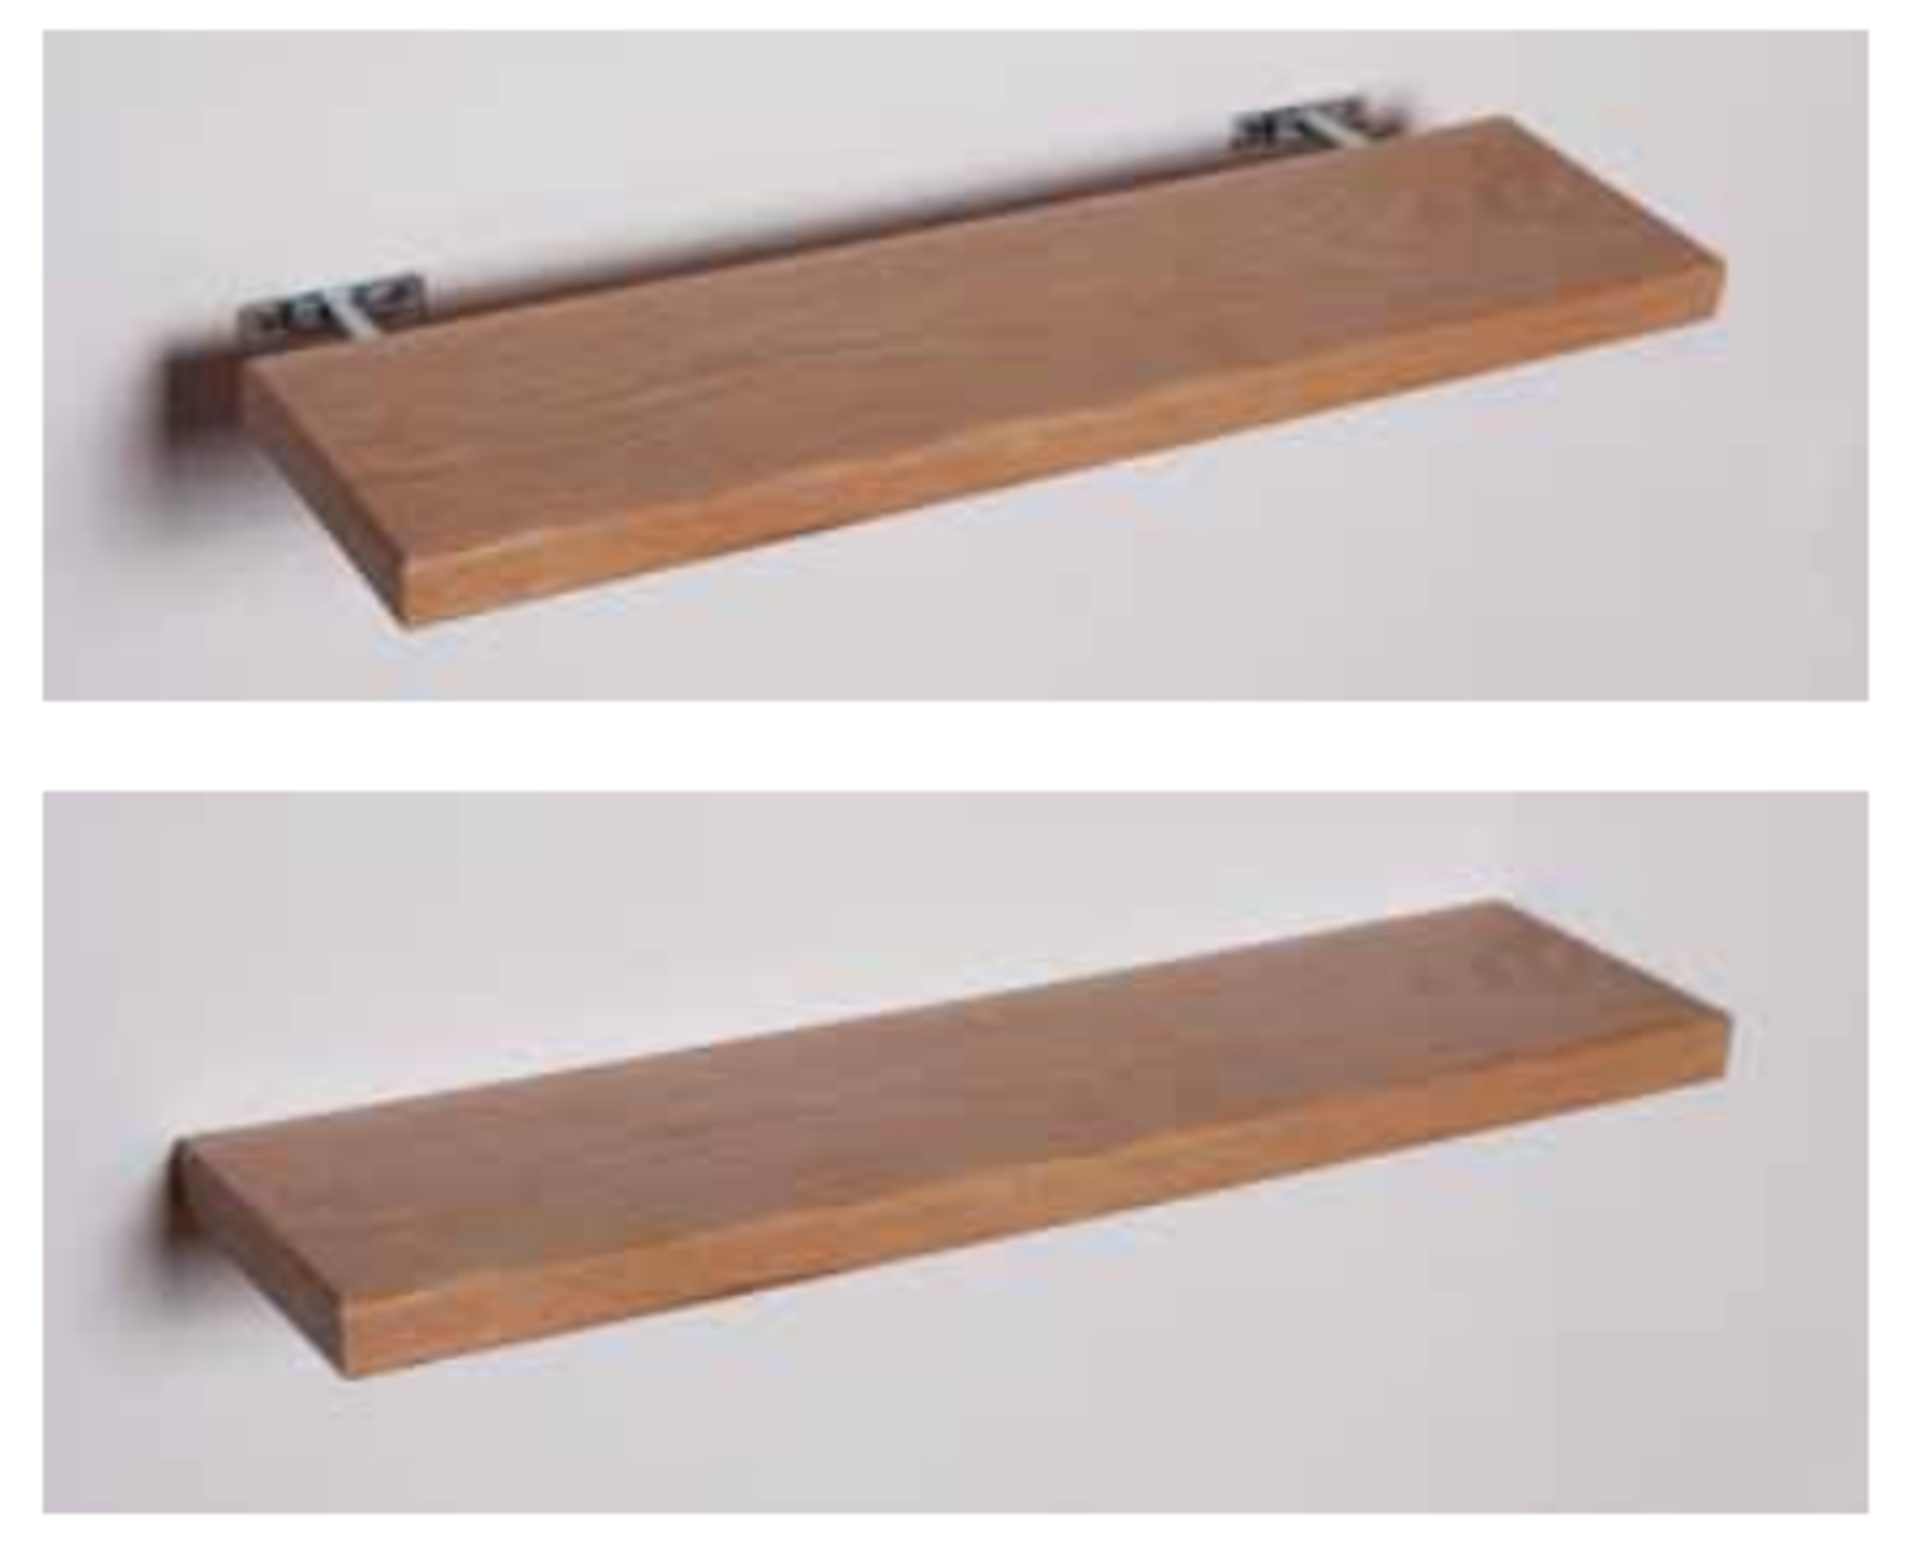 1 x Stonearth Bathroom Storage Shelf With Concealed Brackets - American Solid Walnut - Size: 600mm - Image 2 of 16